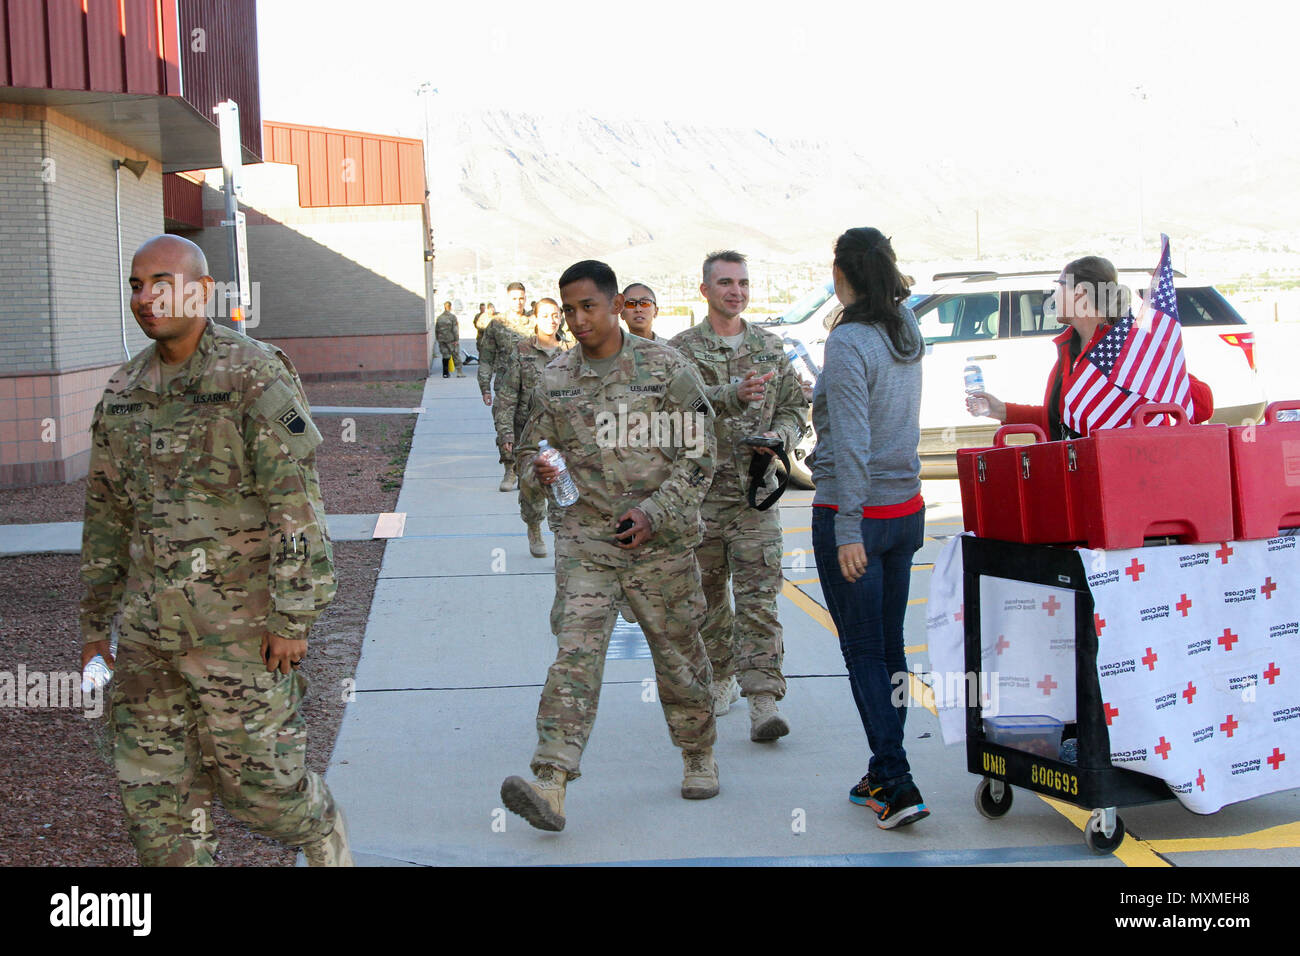 More Than 100 Soldiers From The 369th Chemical Company Based Out Of Fort Bliss Texas Returned From A Nine Month Deployment To Kuwait November 14 76th Division Operational Response Deputy Commanding General Brig